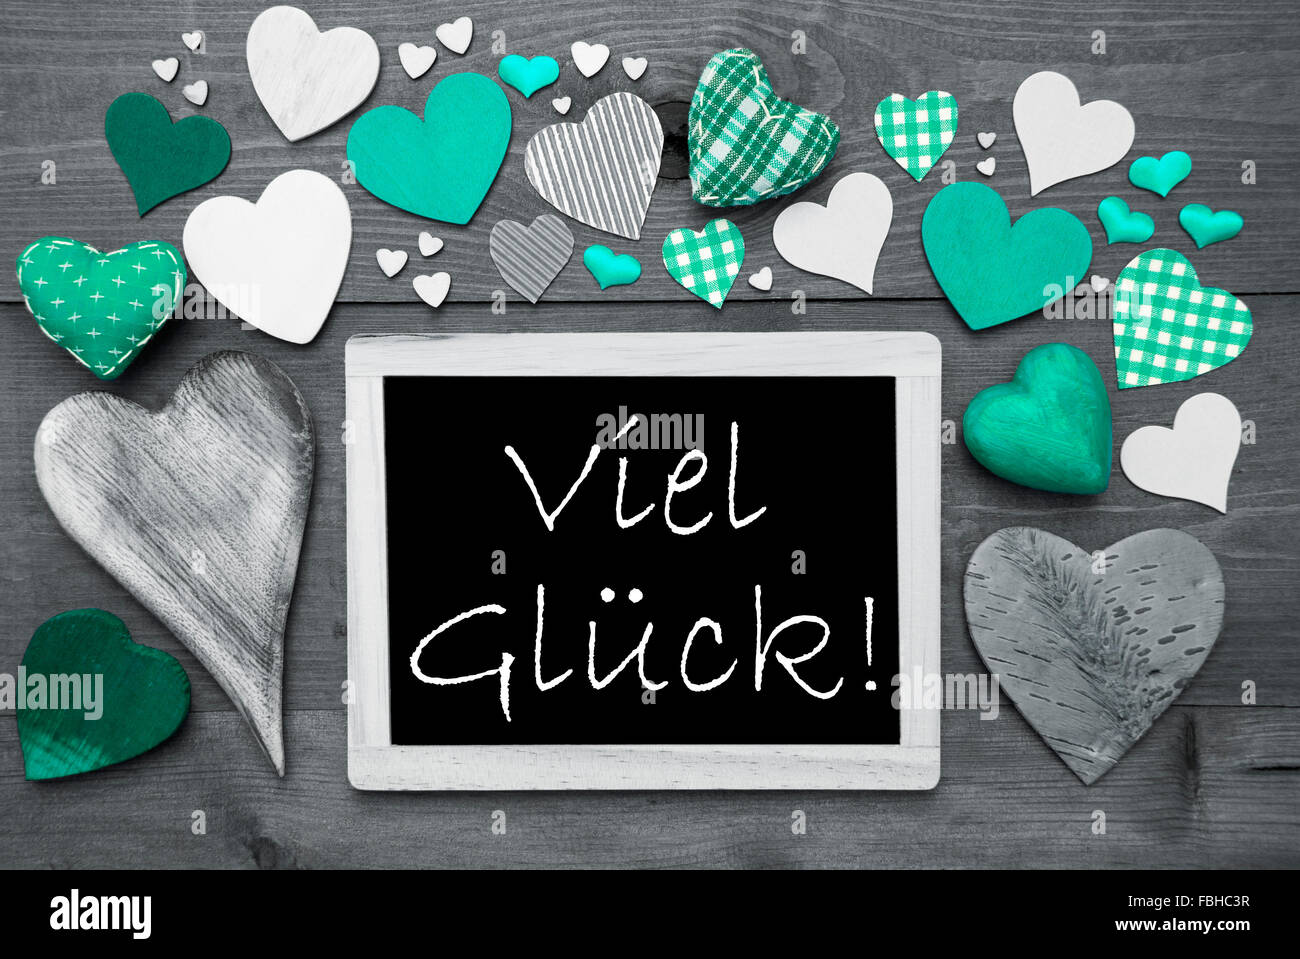 Gray Chalkbord, Green Hearts, Viel Glueck Means Good Luck Stock Photo